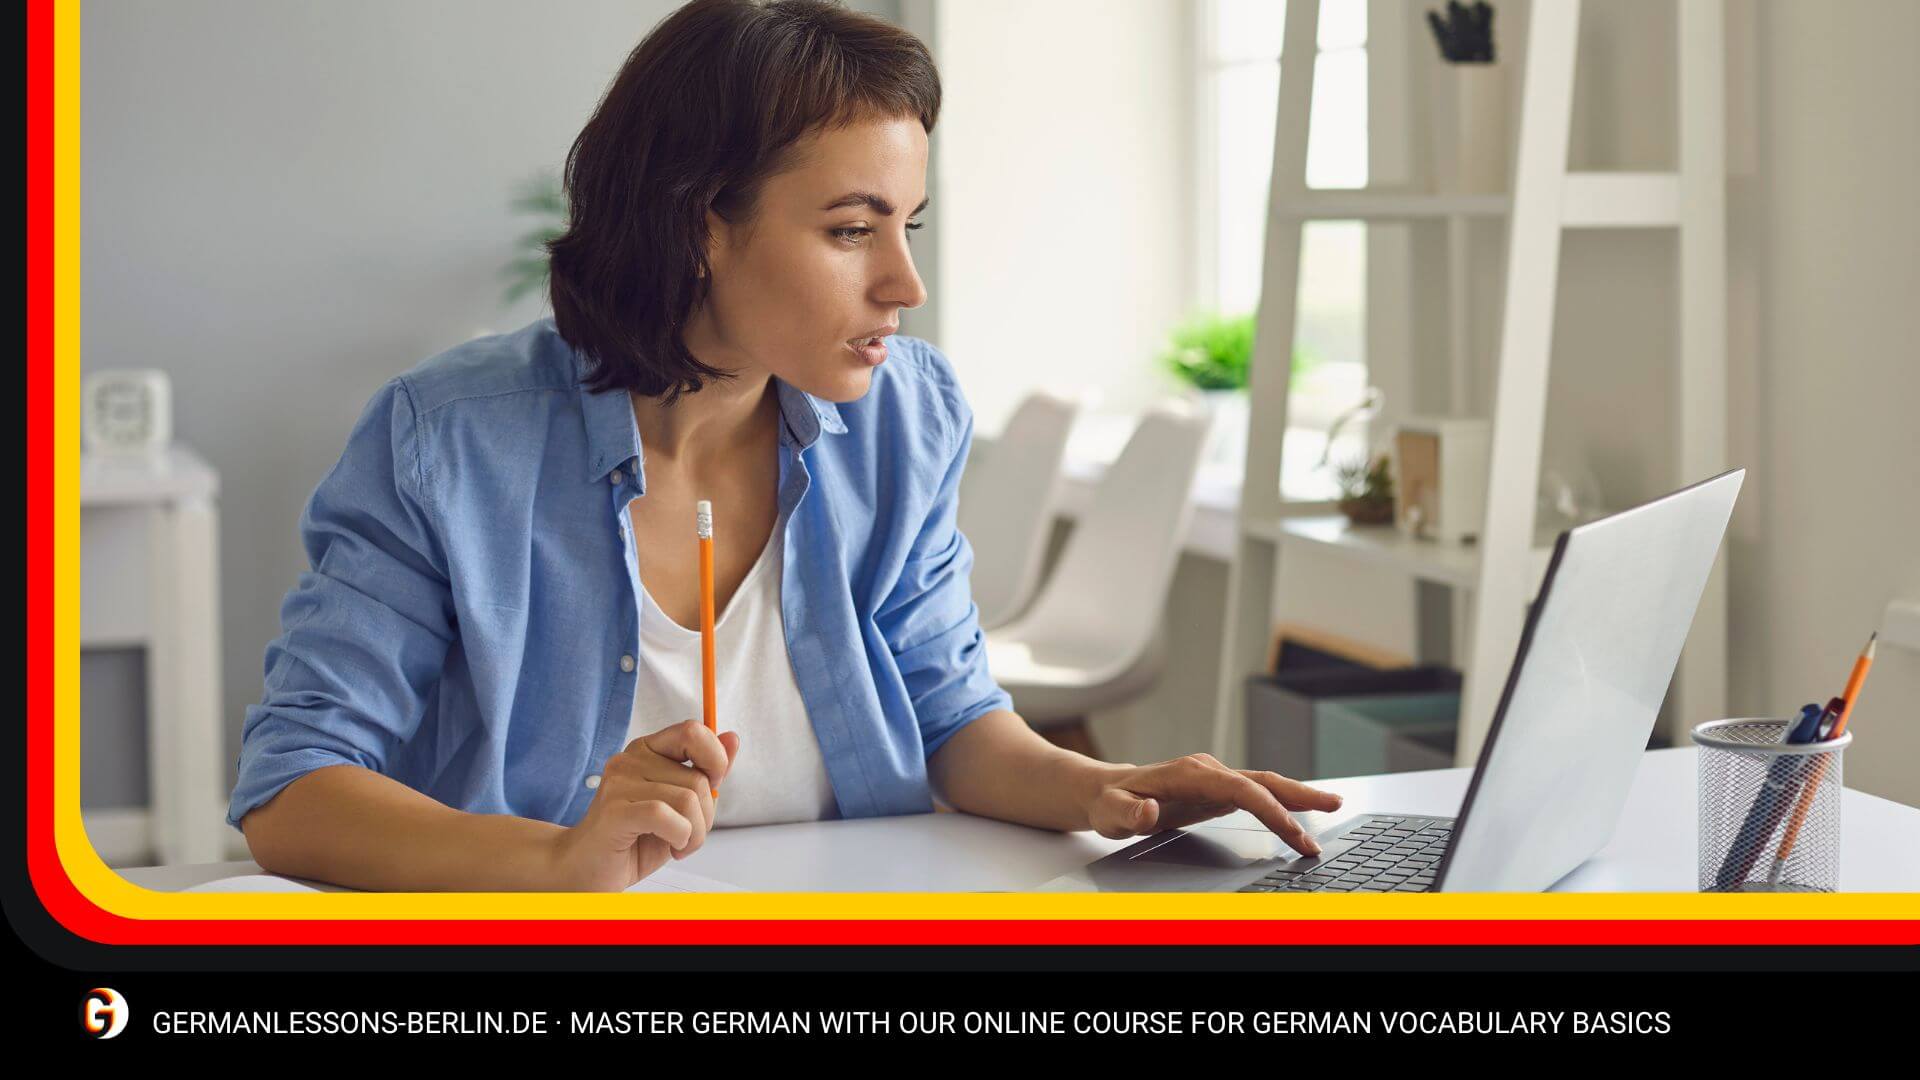 Master German with our Online Course for German Vocabulary Basics